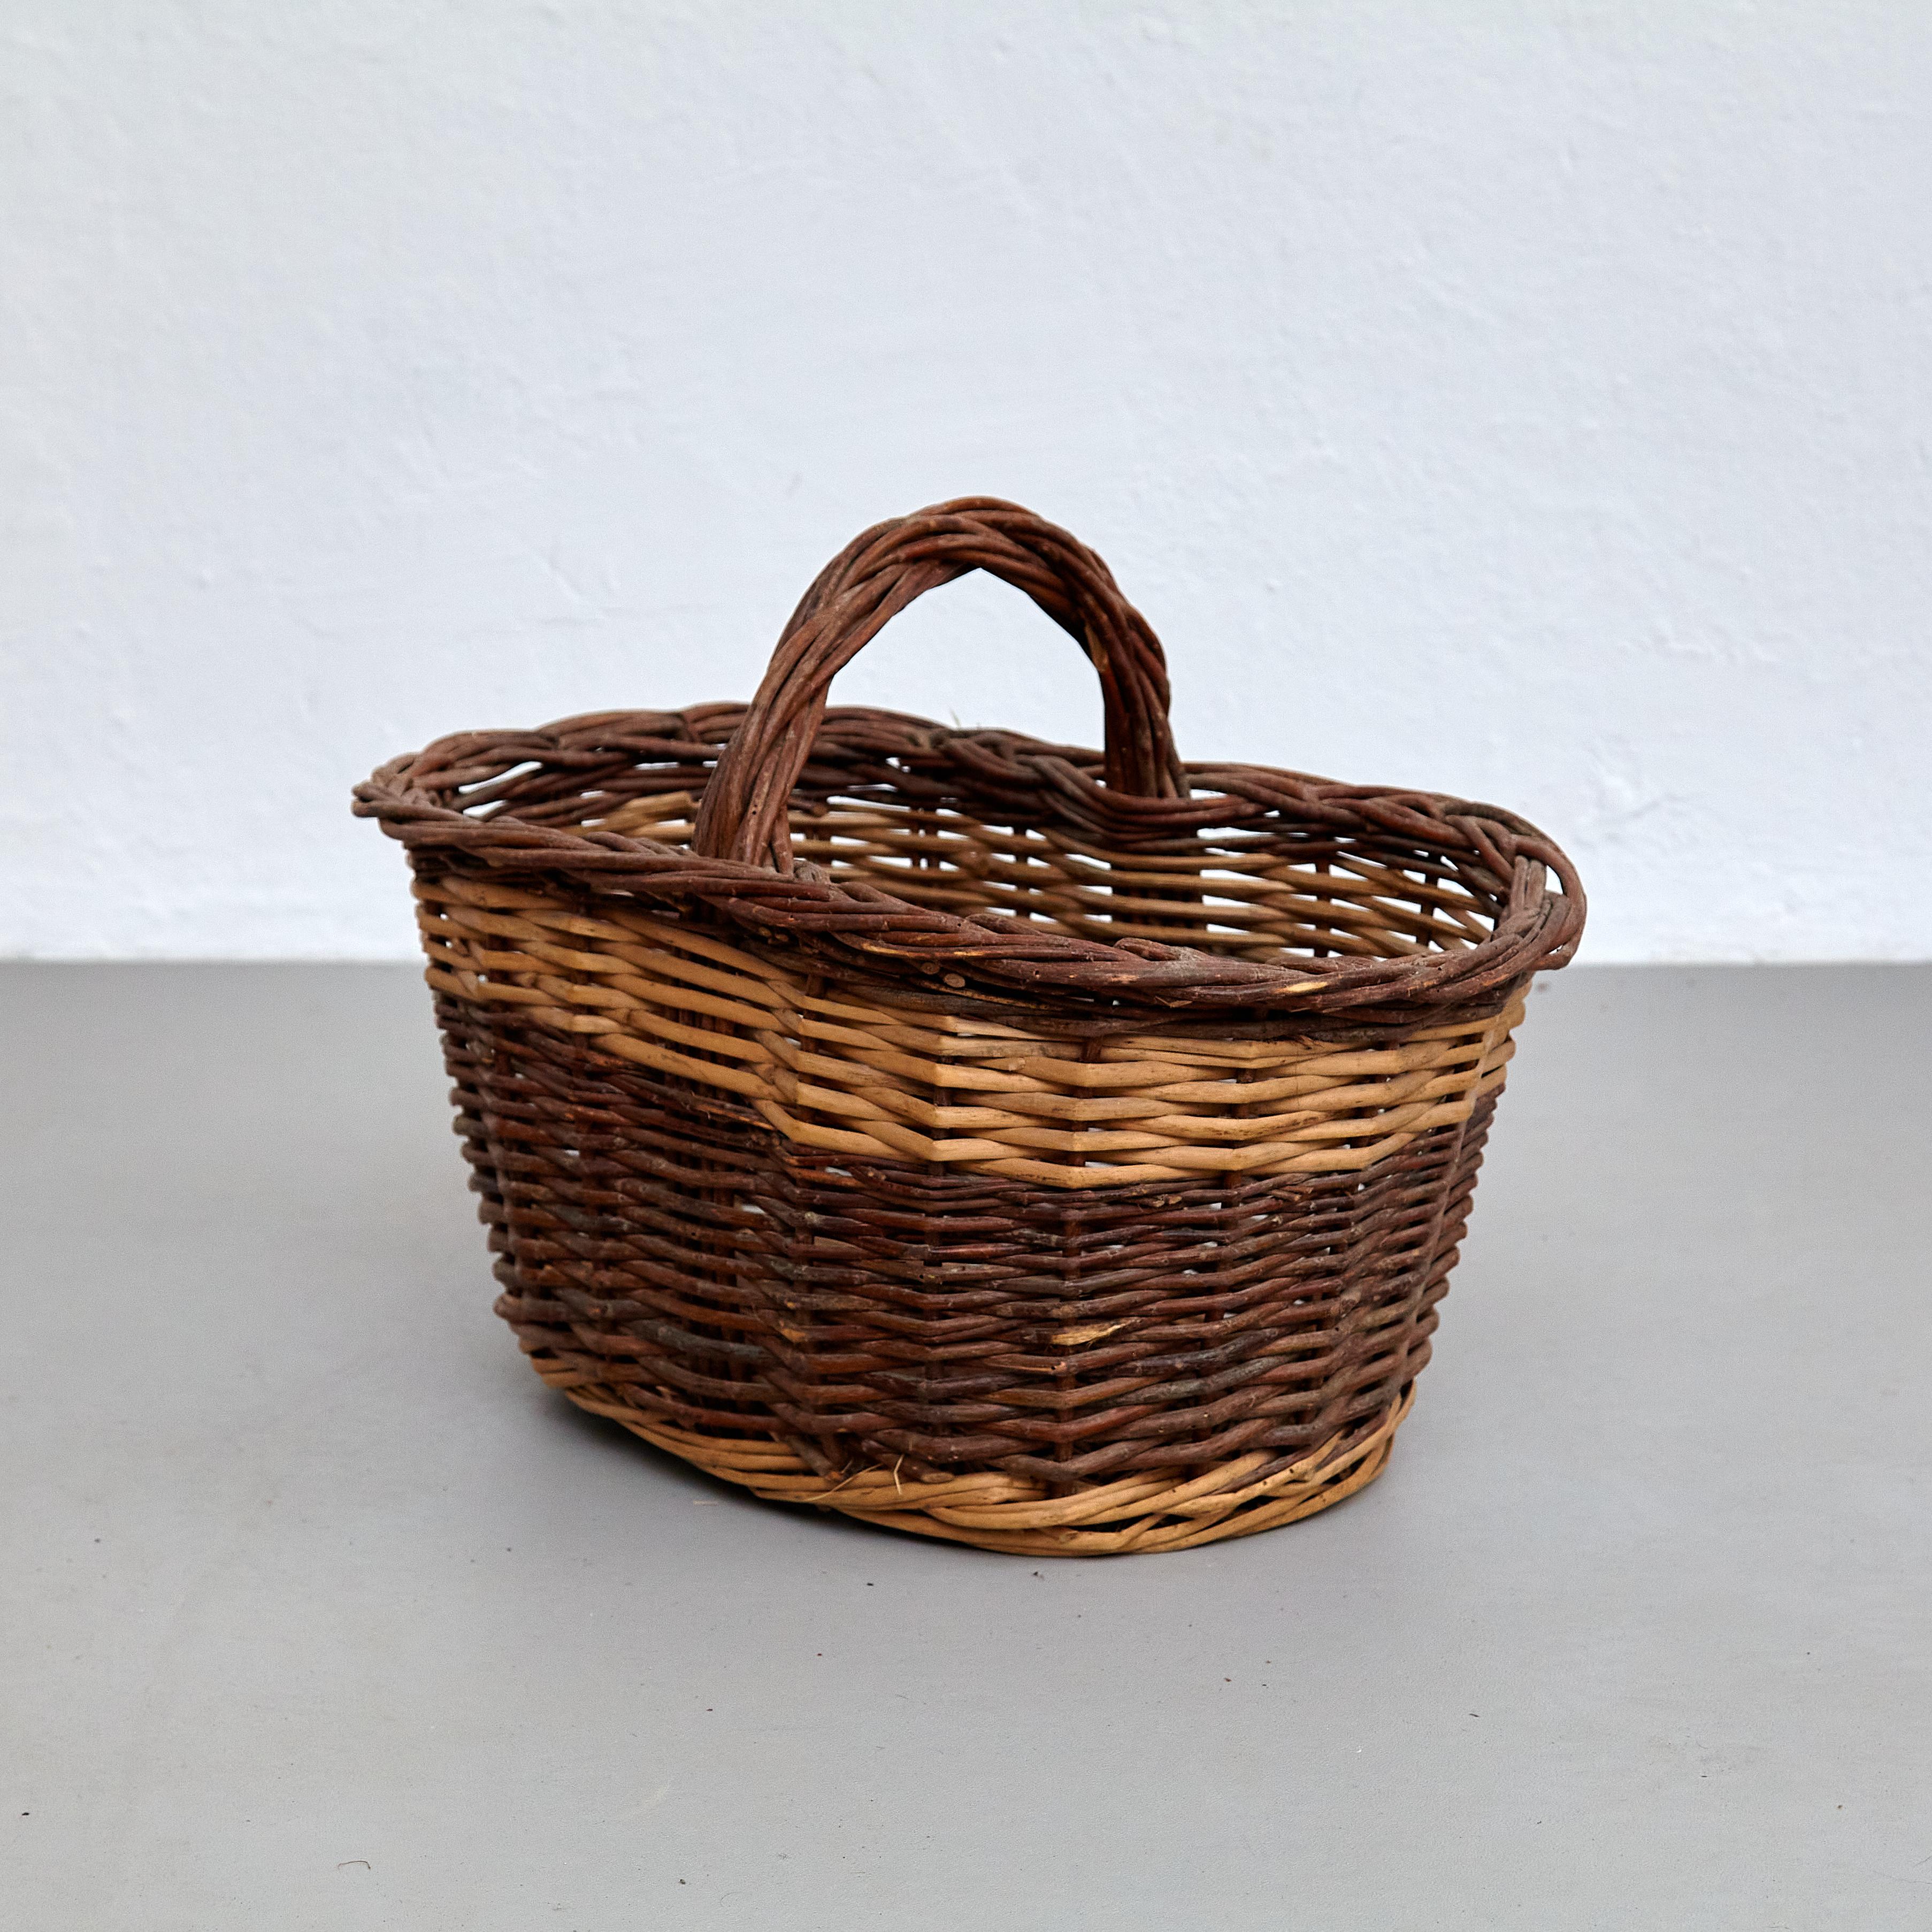 Mid-Century Modern rattan large basket.

In original condition with minor wear consistent of age and use, preserving a beautiful patina.

Materials: 
Rattan 

Dimensions: 
D 35 cm x W 52 cm x H 37 cm.

Important information regarding